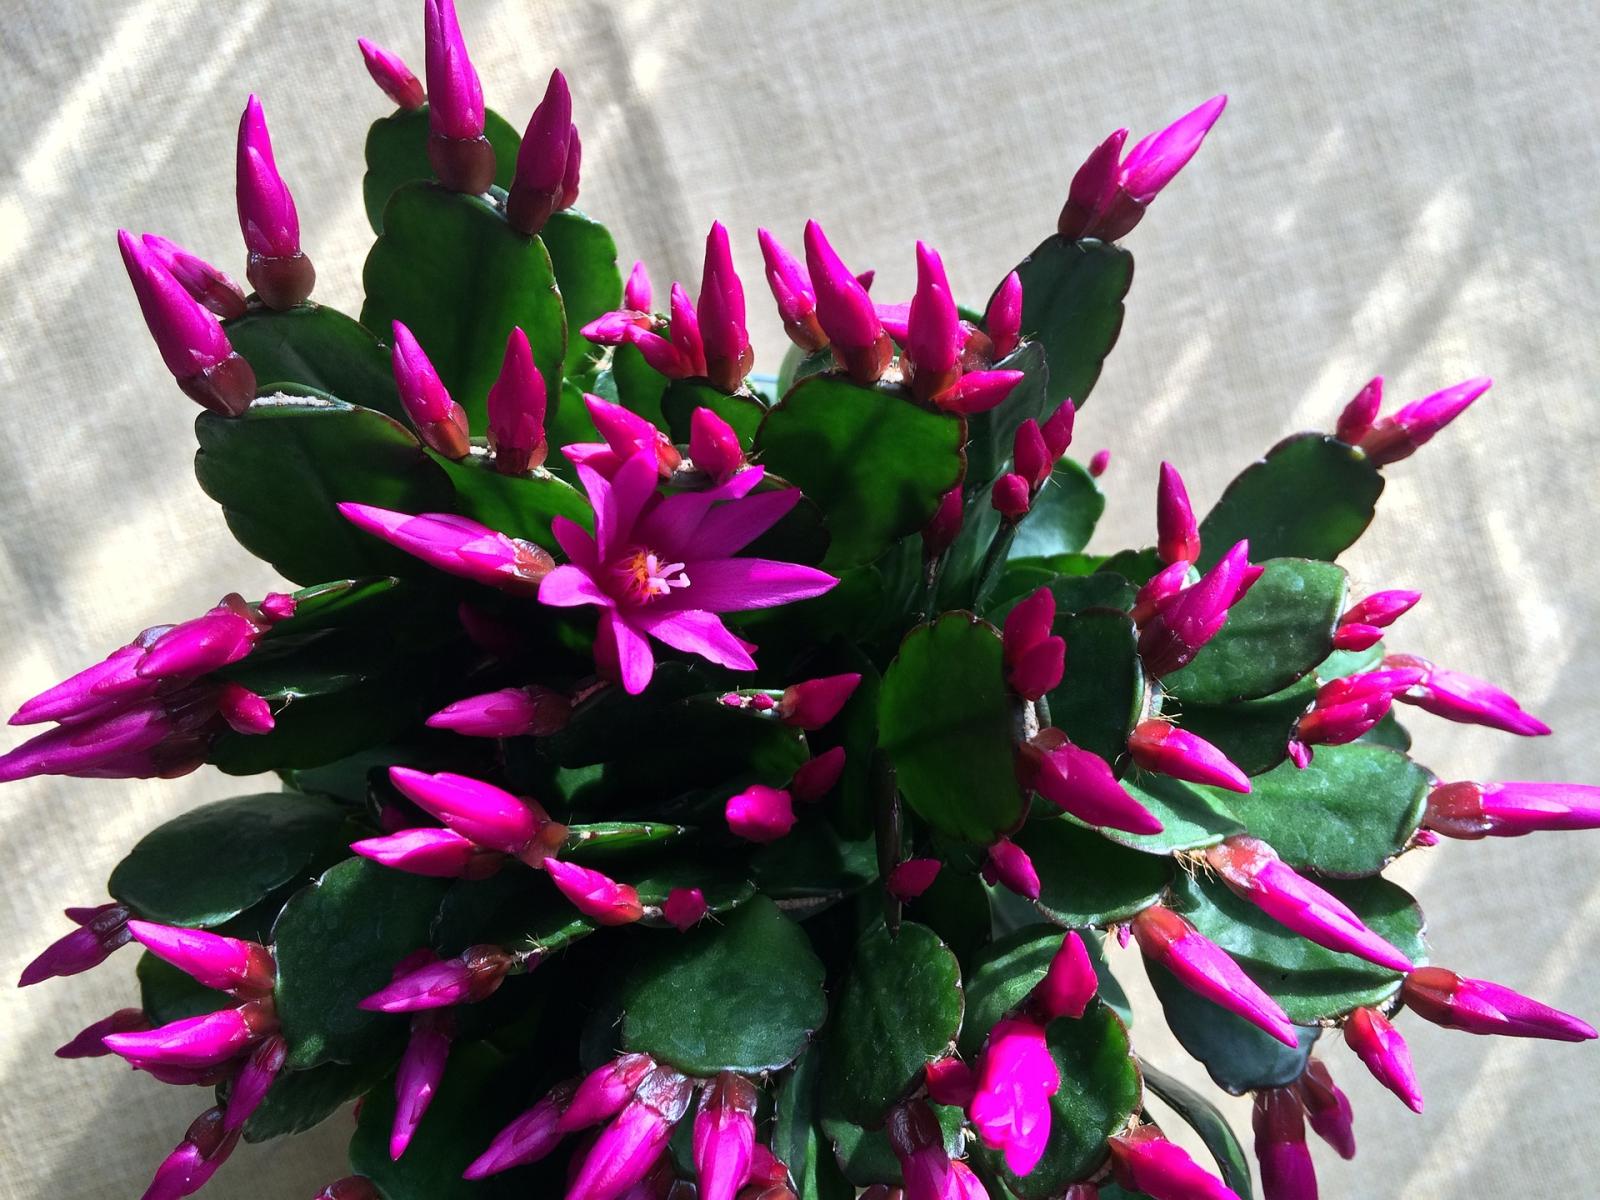 Image of a Christmas cactus in bloom. 